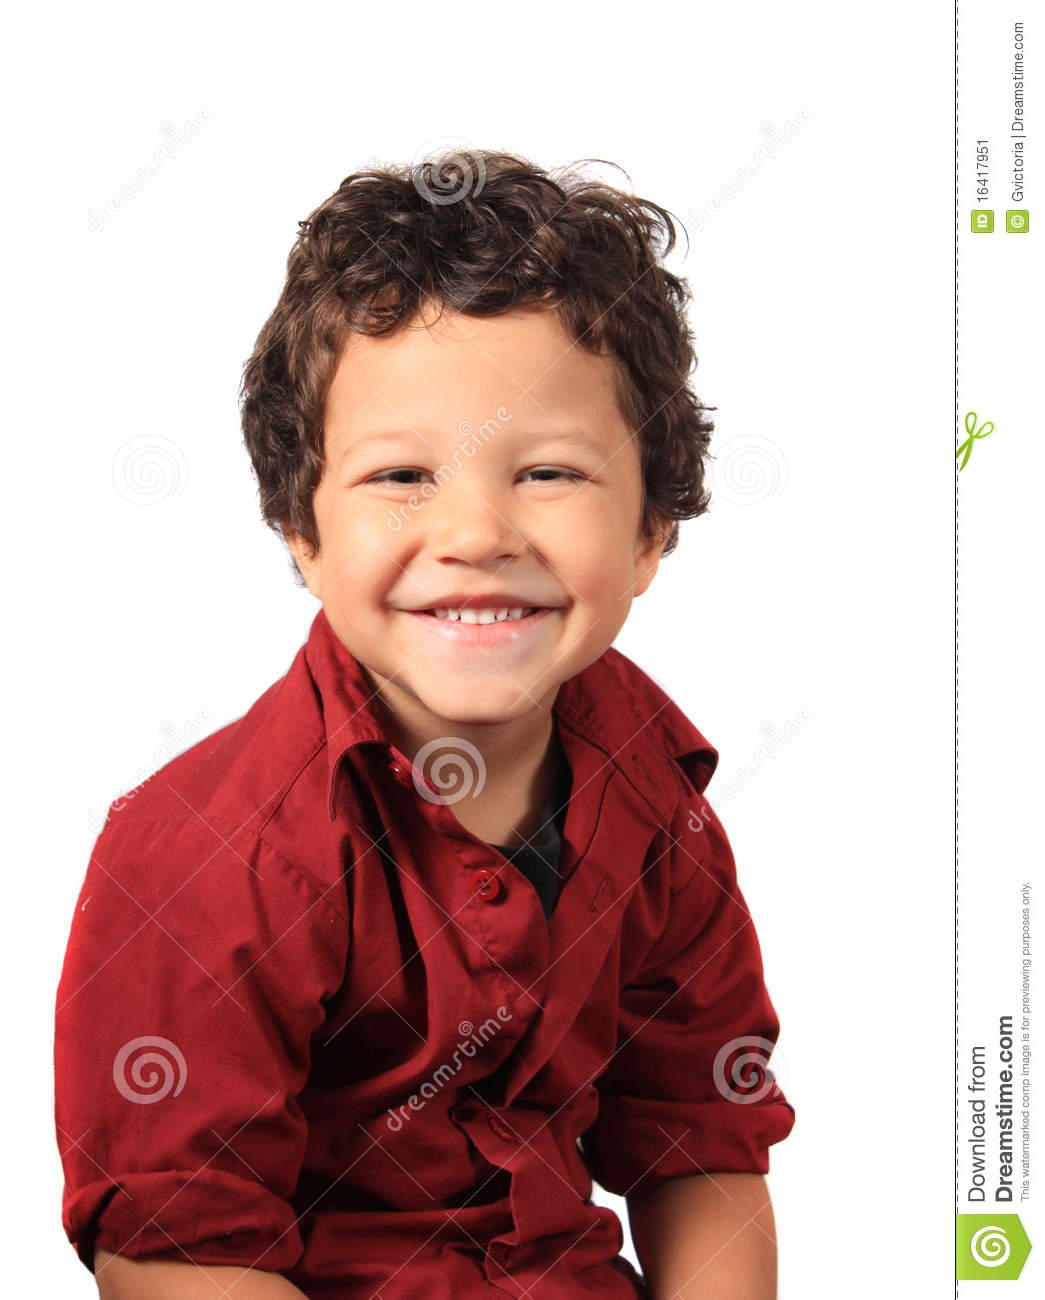 Smiling Three Year Old Toddler Isolated On A White Background